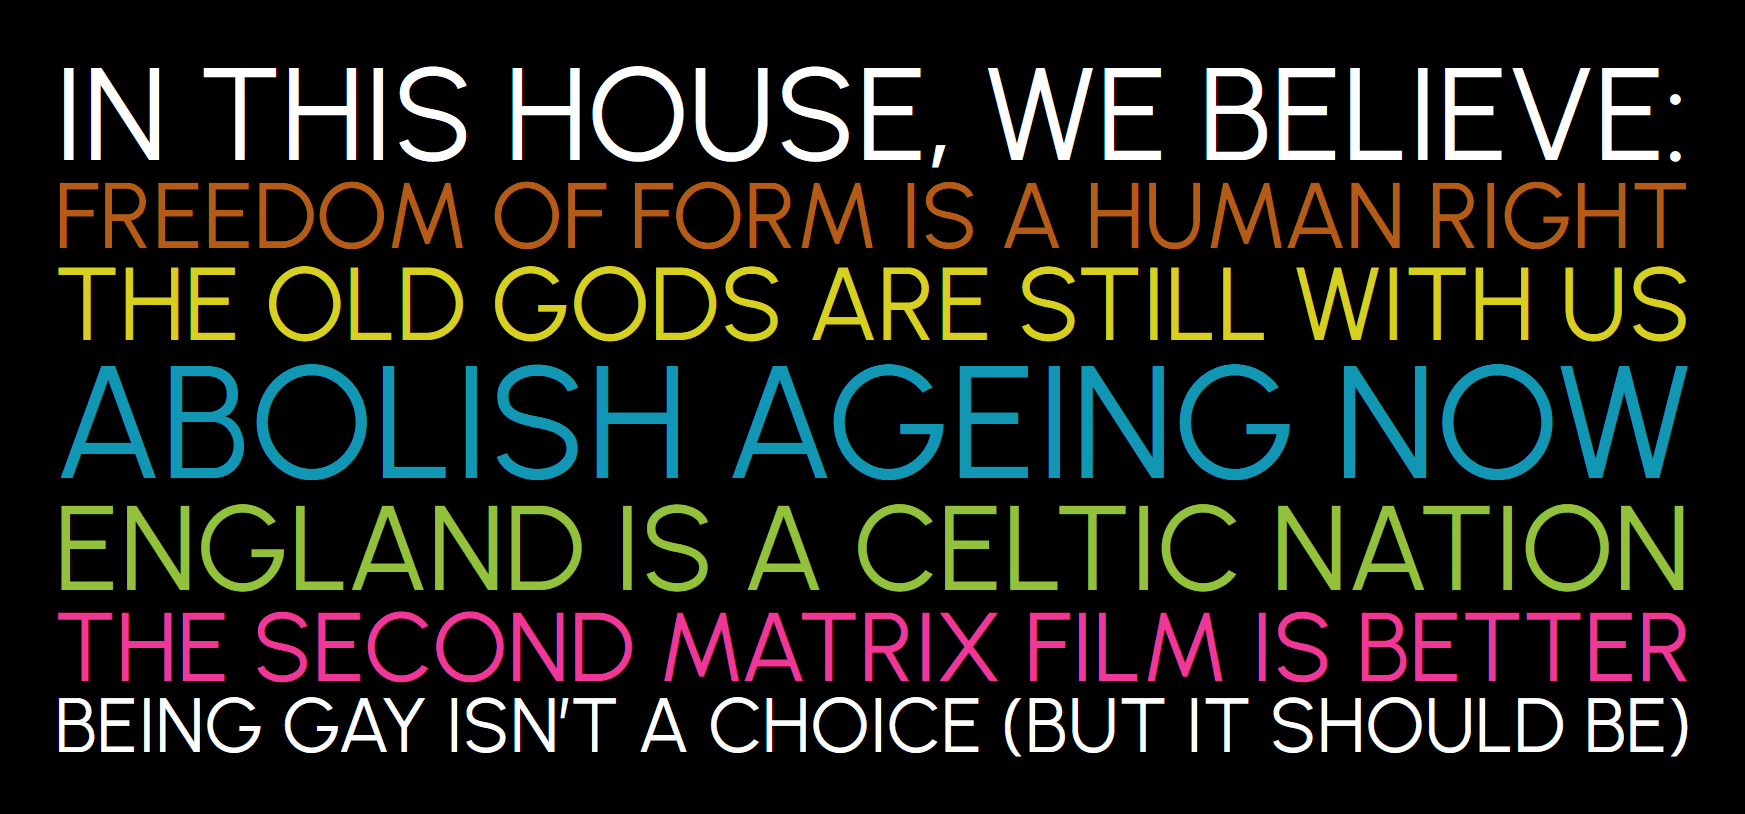 Yard sign reading In this house we believe: Freedom of form is a human right. The old Gods are still with us. Abolish ageing now. England is a Celtic nation. The second Matrix film is better. Being gay isn’t a choice (but it should be).